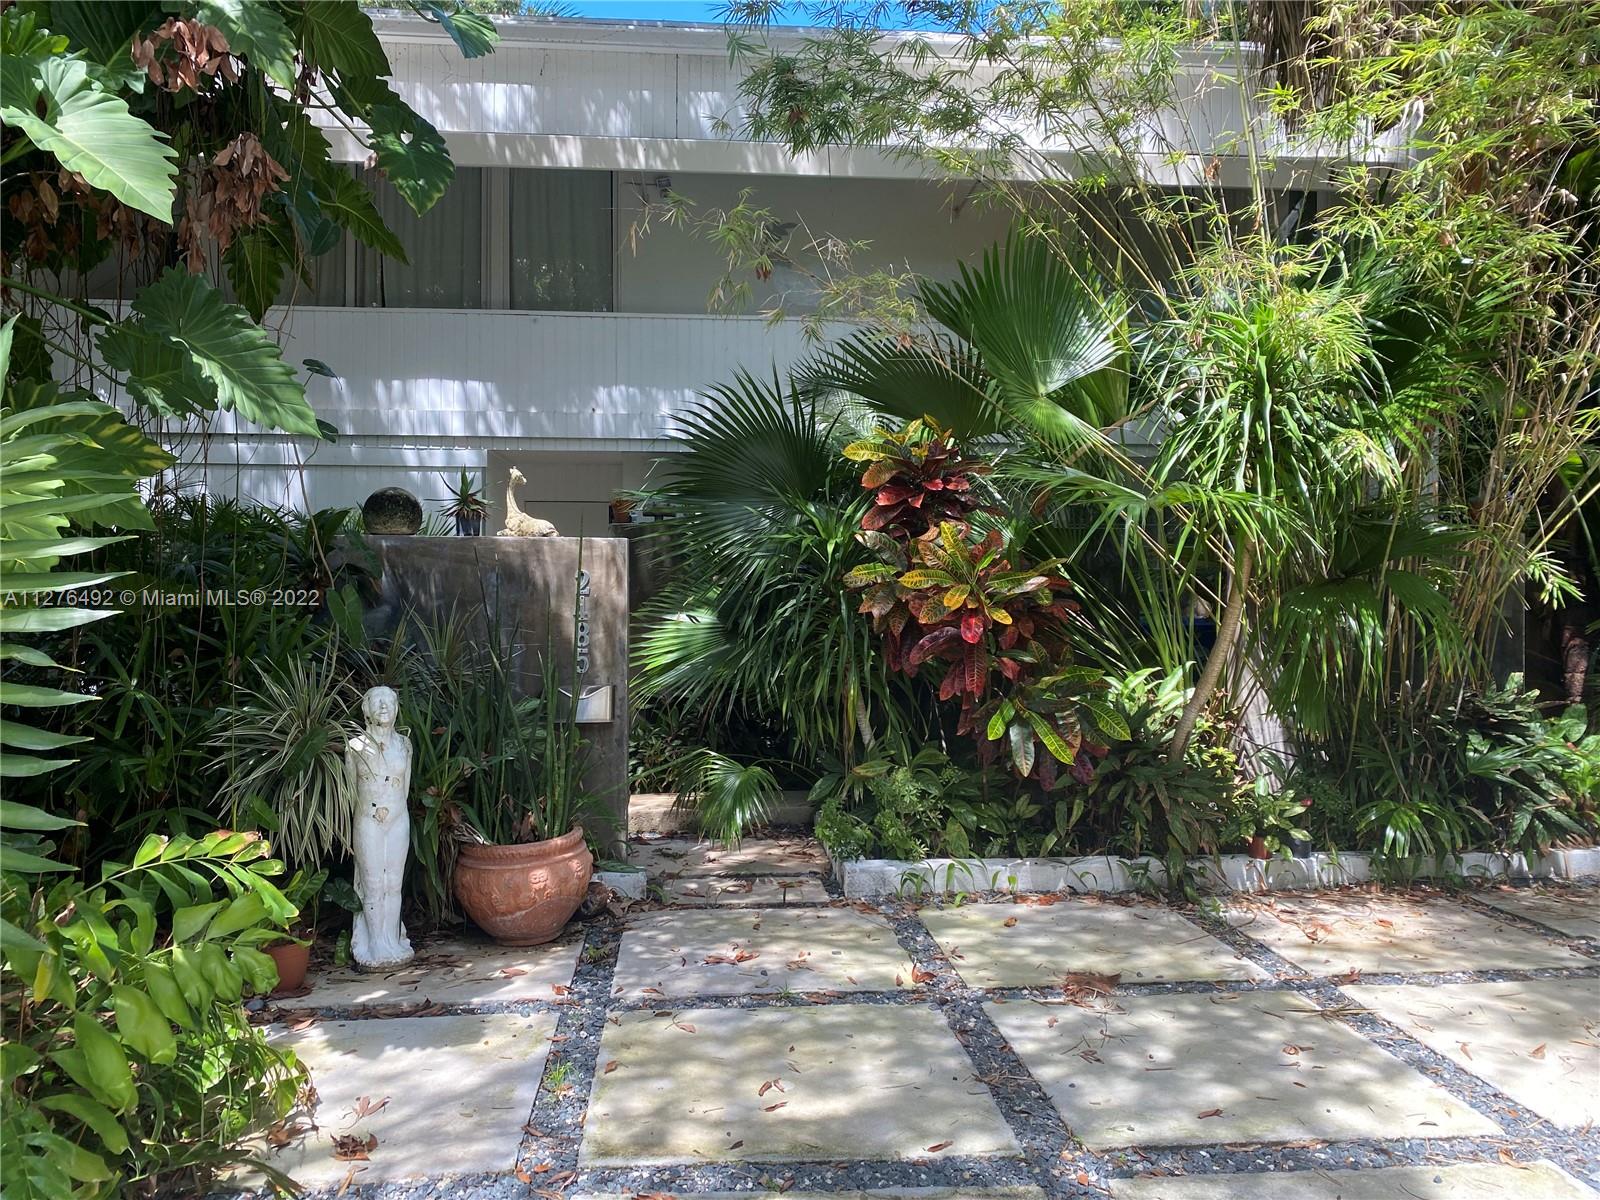 Located in North Grove, close to the Village of Coconut Grove with shopping and good restaurants, a short compute to downtown, This beautiful 3 bedroom and 3 and 1/2 bath home is a must see. Floor to ceiling windows in the living room provide a beautiful view to a garden and  pool, providing privacy and serenity. One bedroom with bath is on the first floor. Also there is a Powder room.
Upstairs is 2 bedrooms with their own bathrooms.